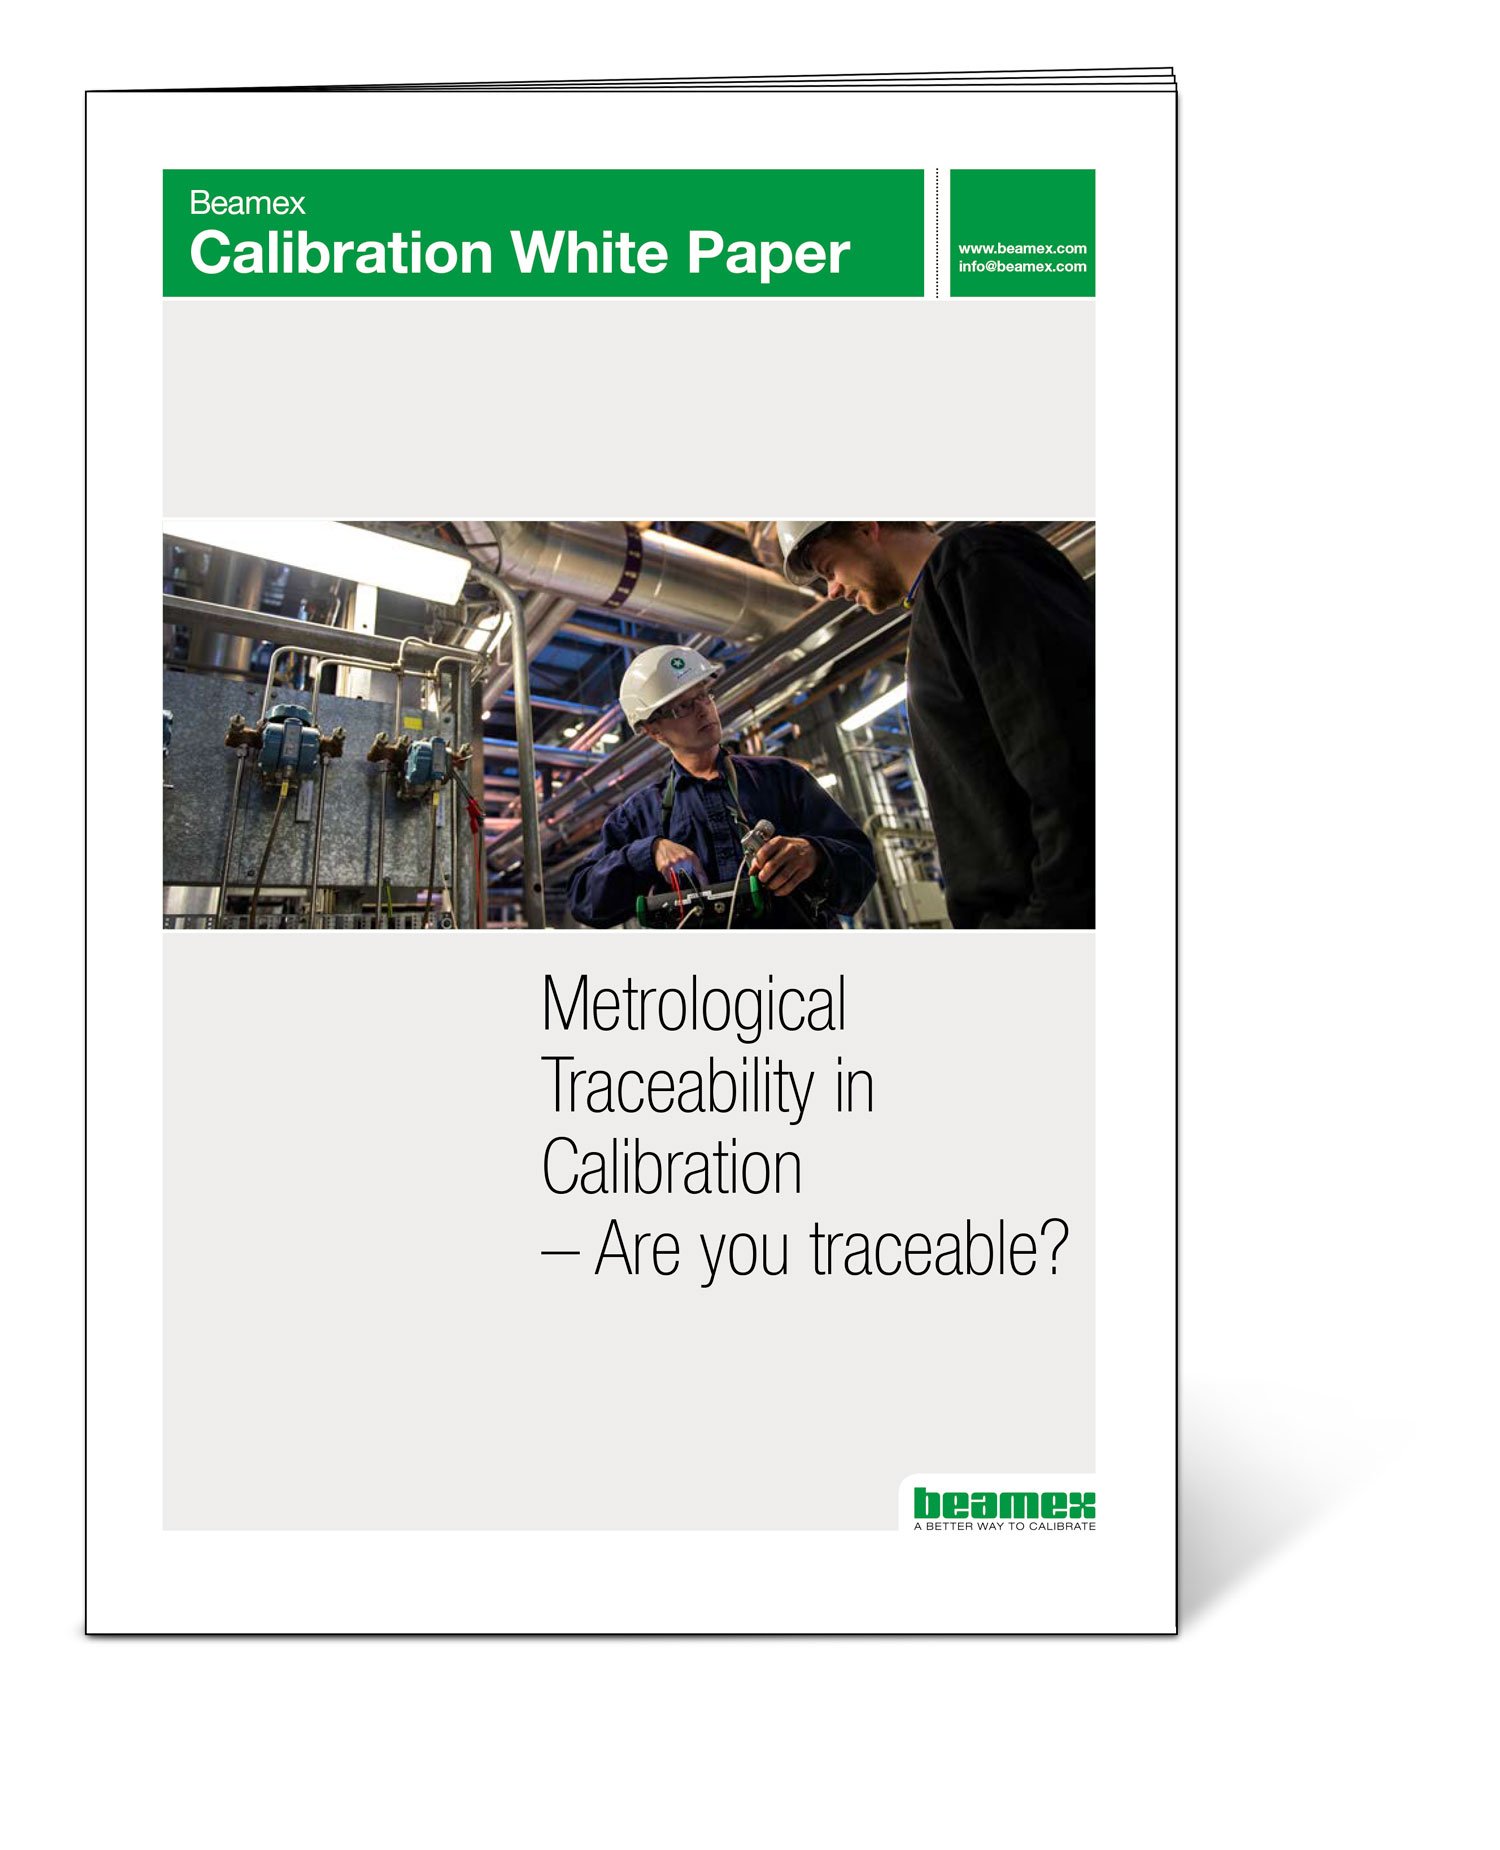 Are you traceable - Beamex white paper